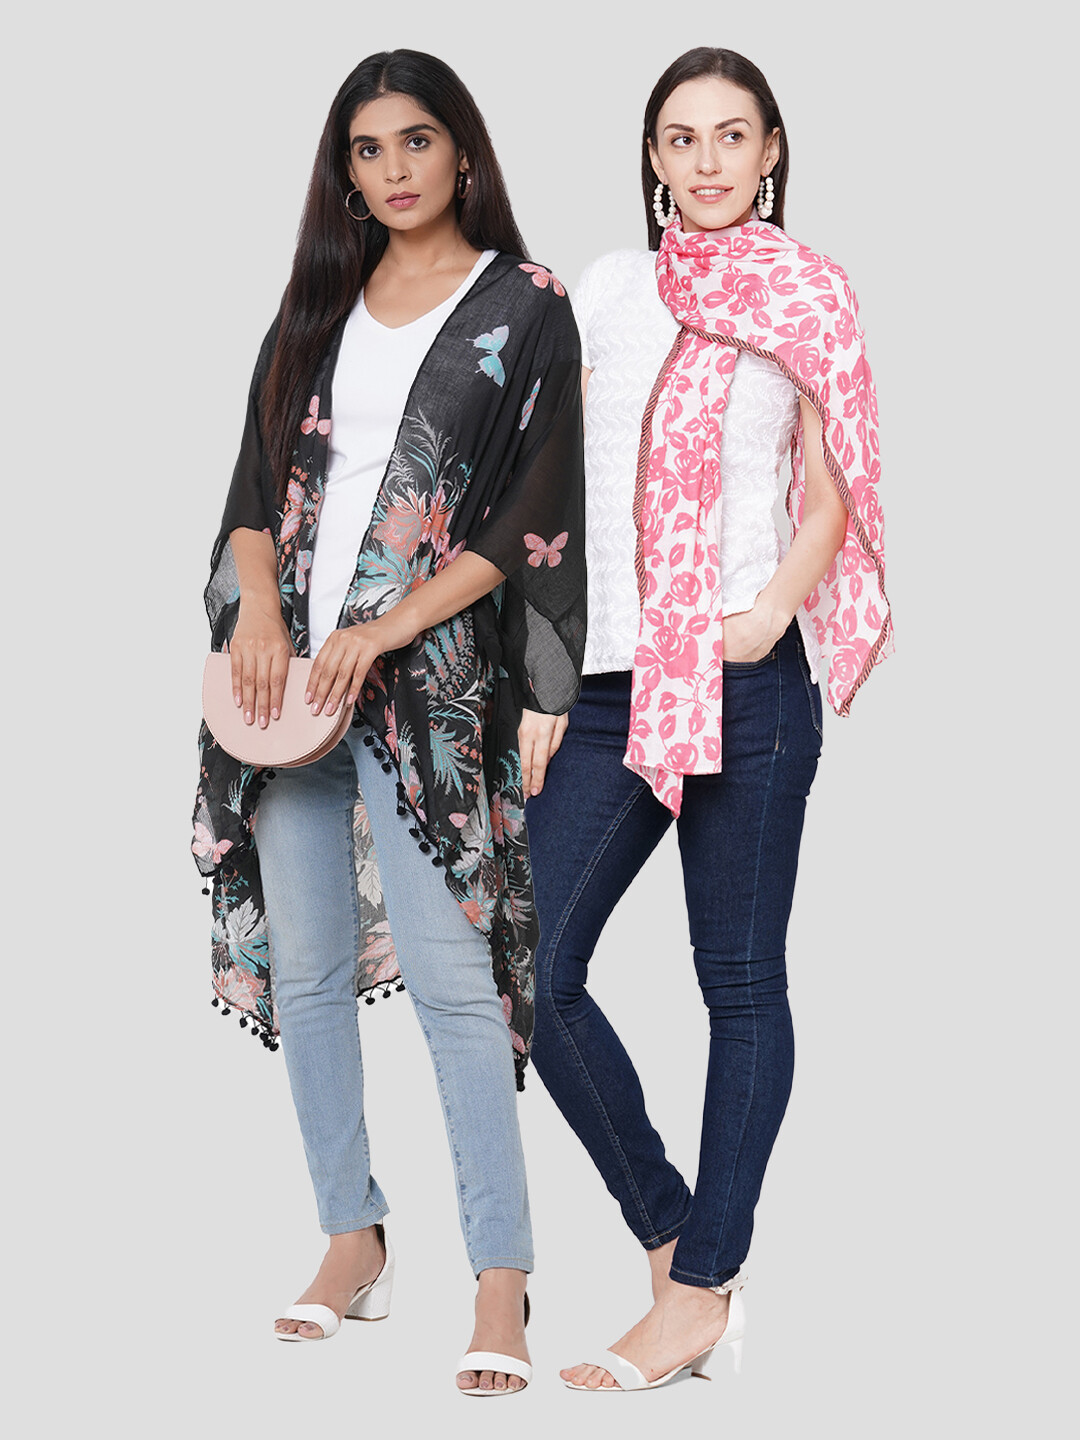 Stylist Printed Ponchos & Printed Scarf with Border Design - Combo offer